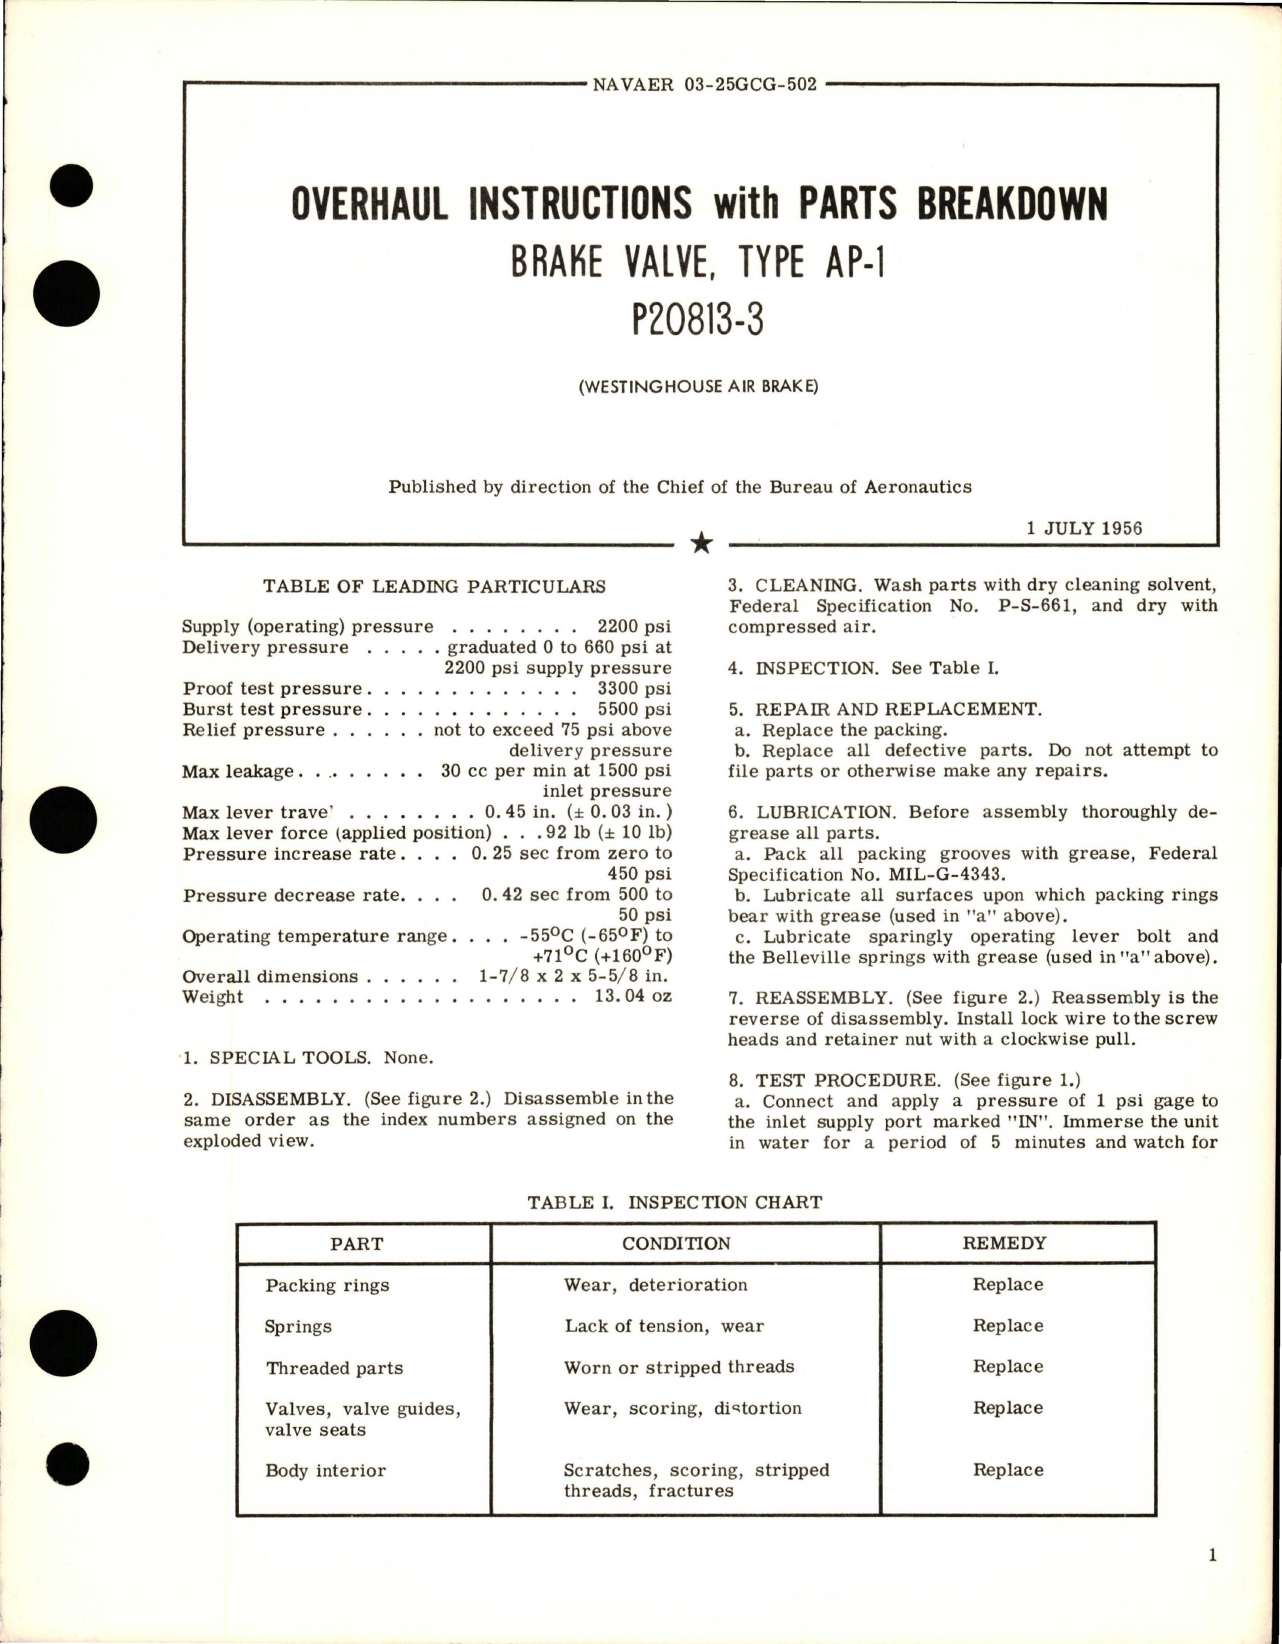 Sample page 1 from AirCorps Library document: Overhaul Instructions with Parts Breakdown for Type AP-1 Brake Valve - P20813-3